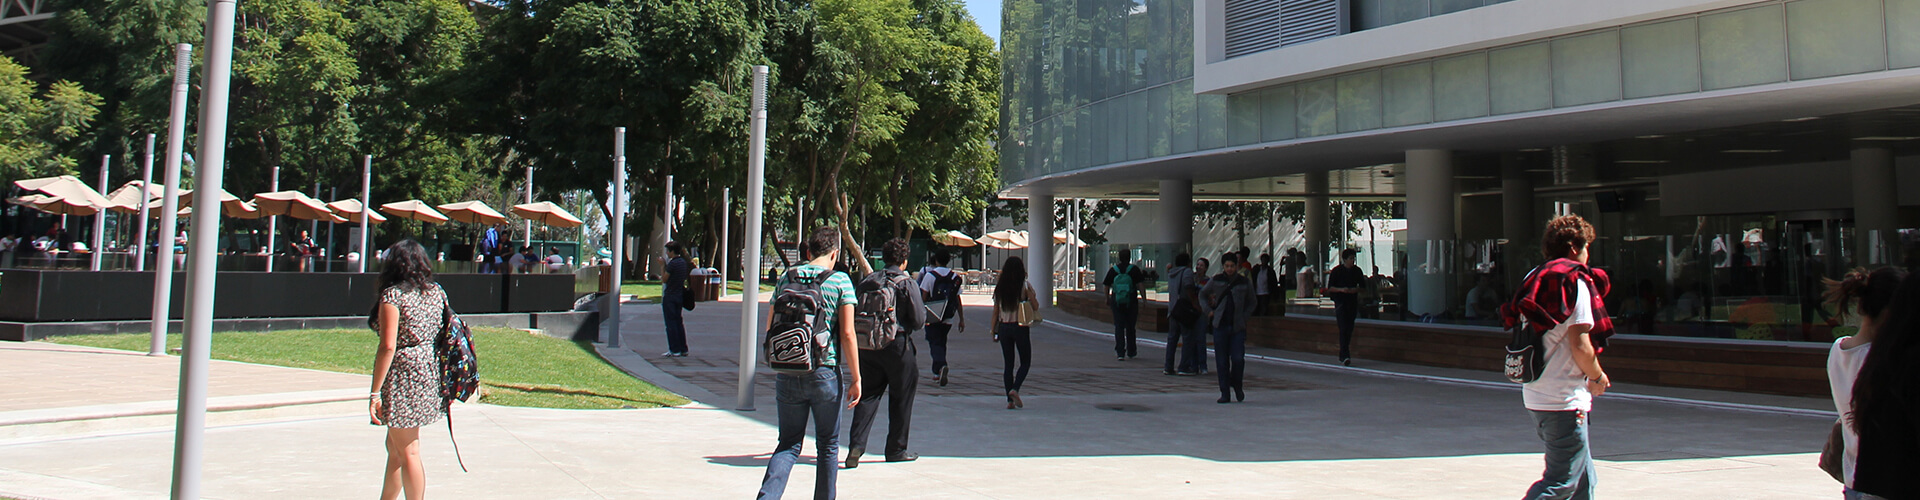 People walking across a modern university campus on a sunny day.